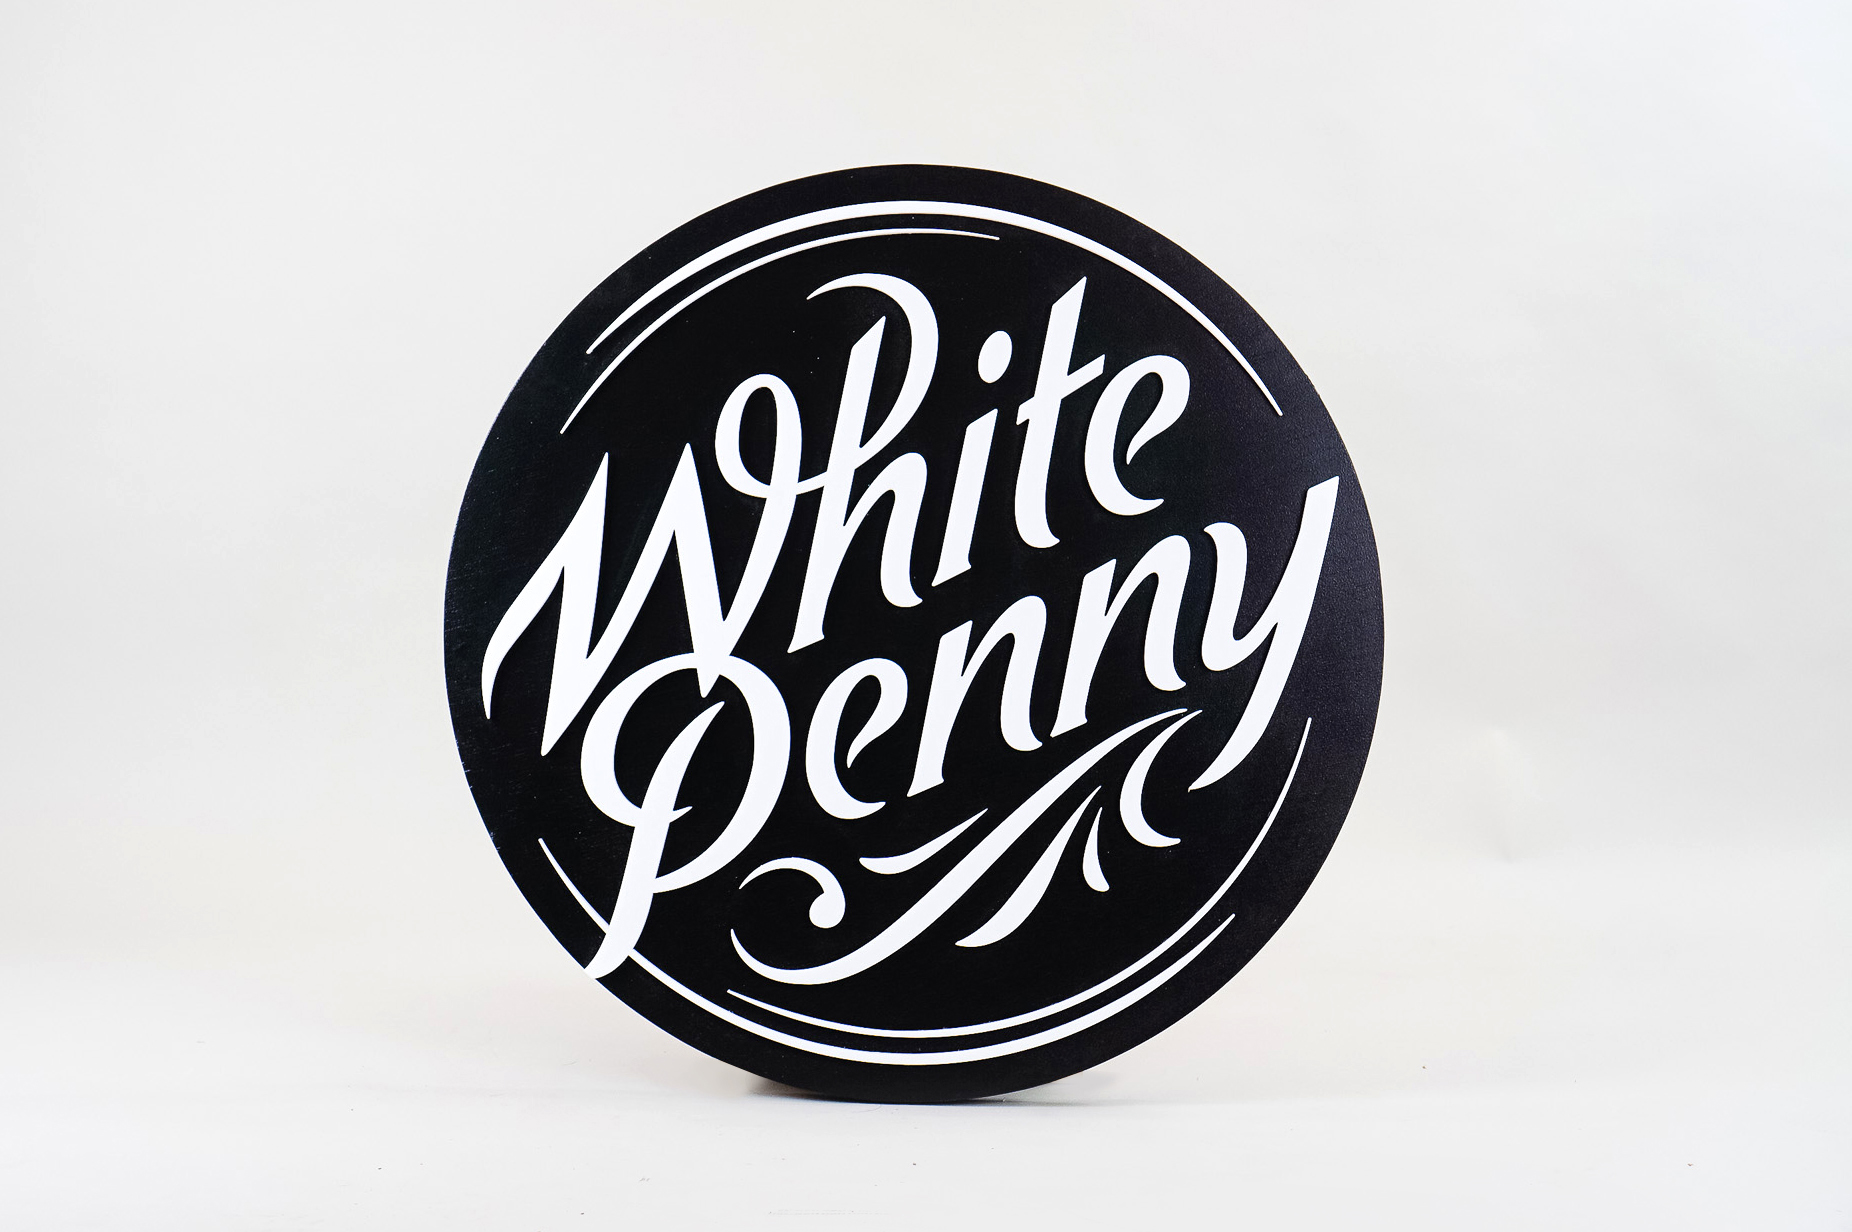 Black and white round raised sign with intricate lettering for Whitepenny, a web development, design and branding firm based in New Jersey.